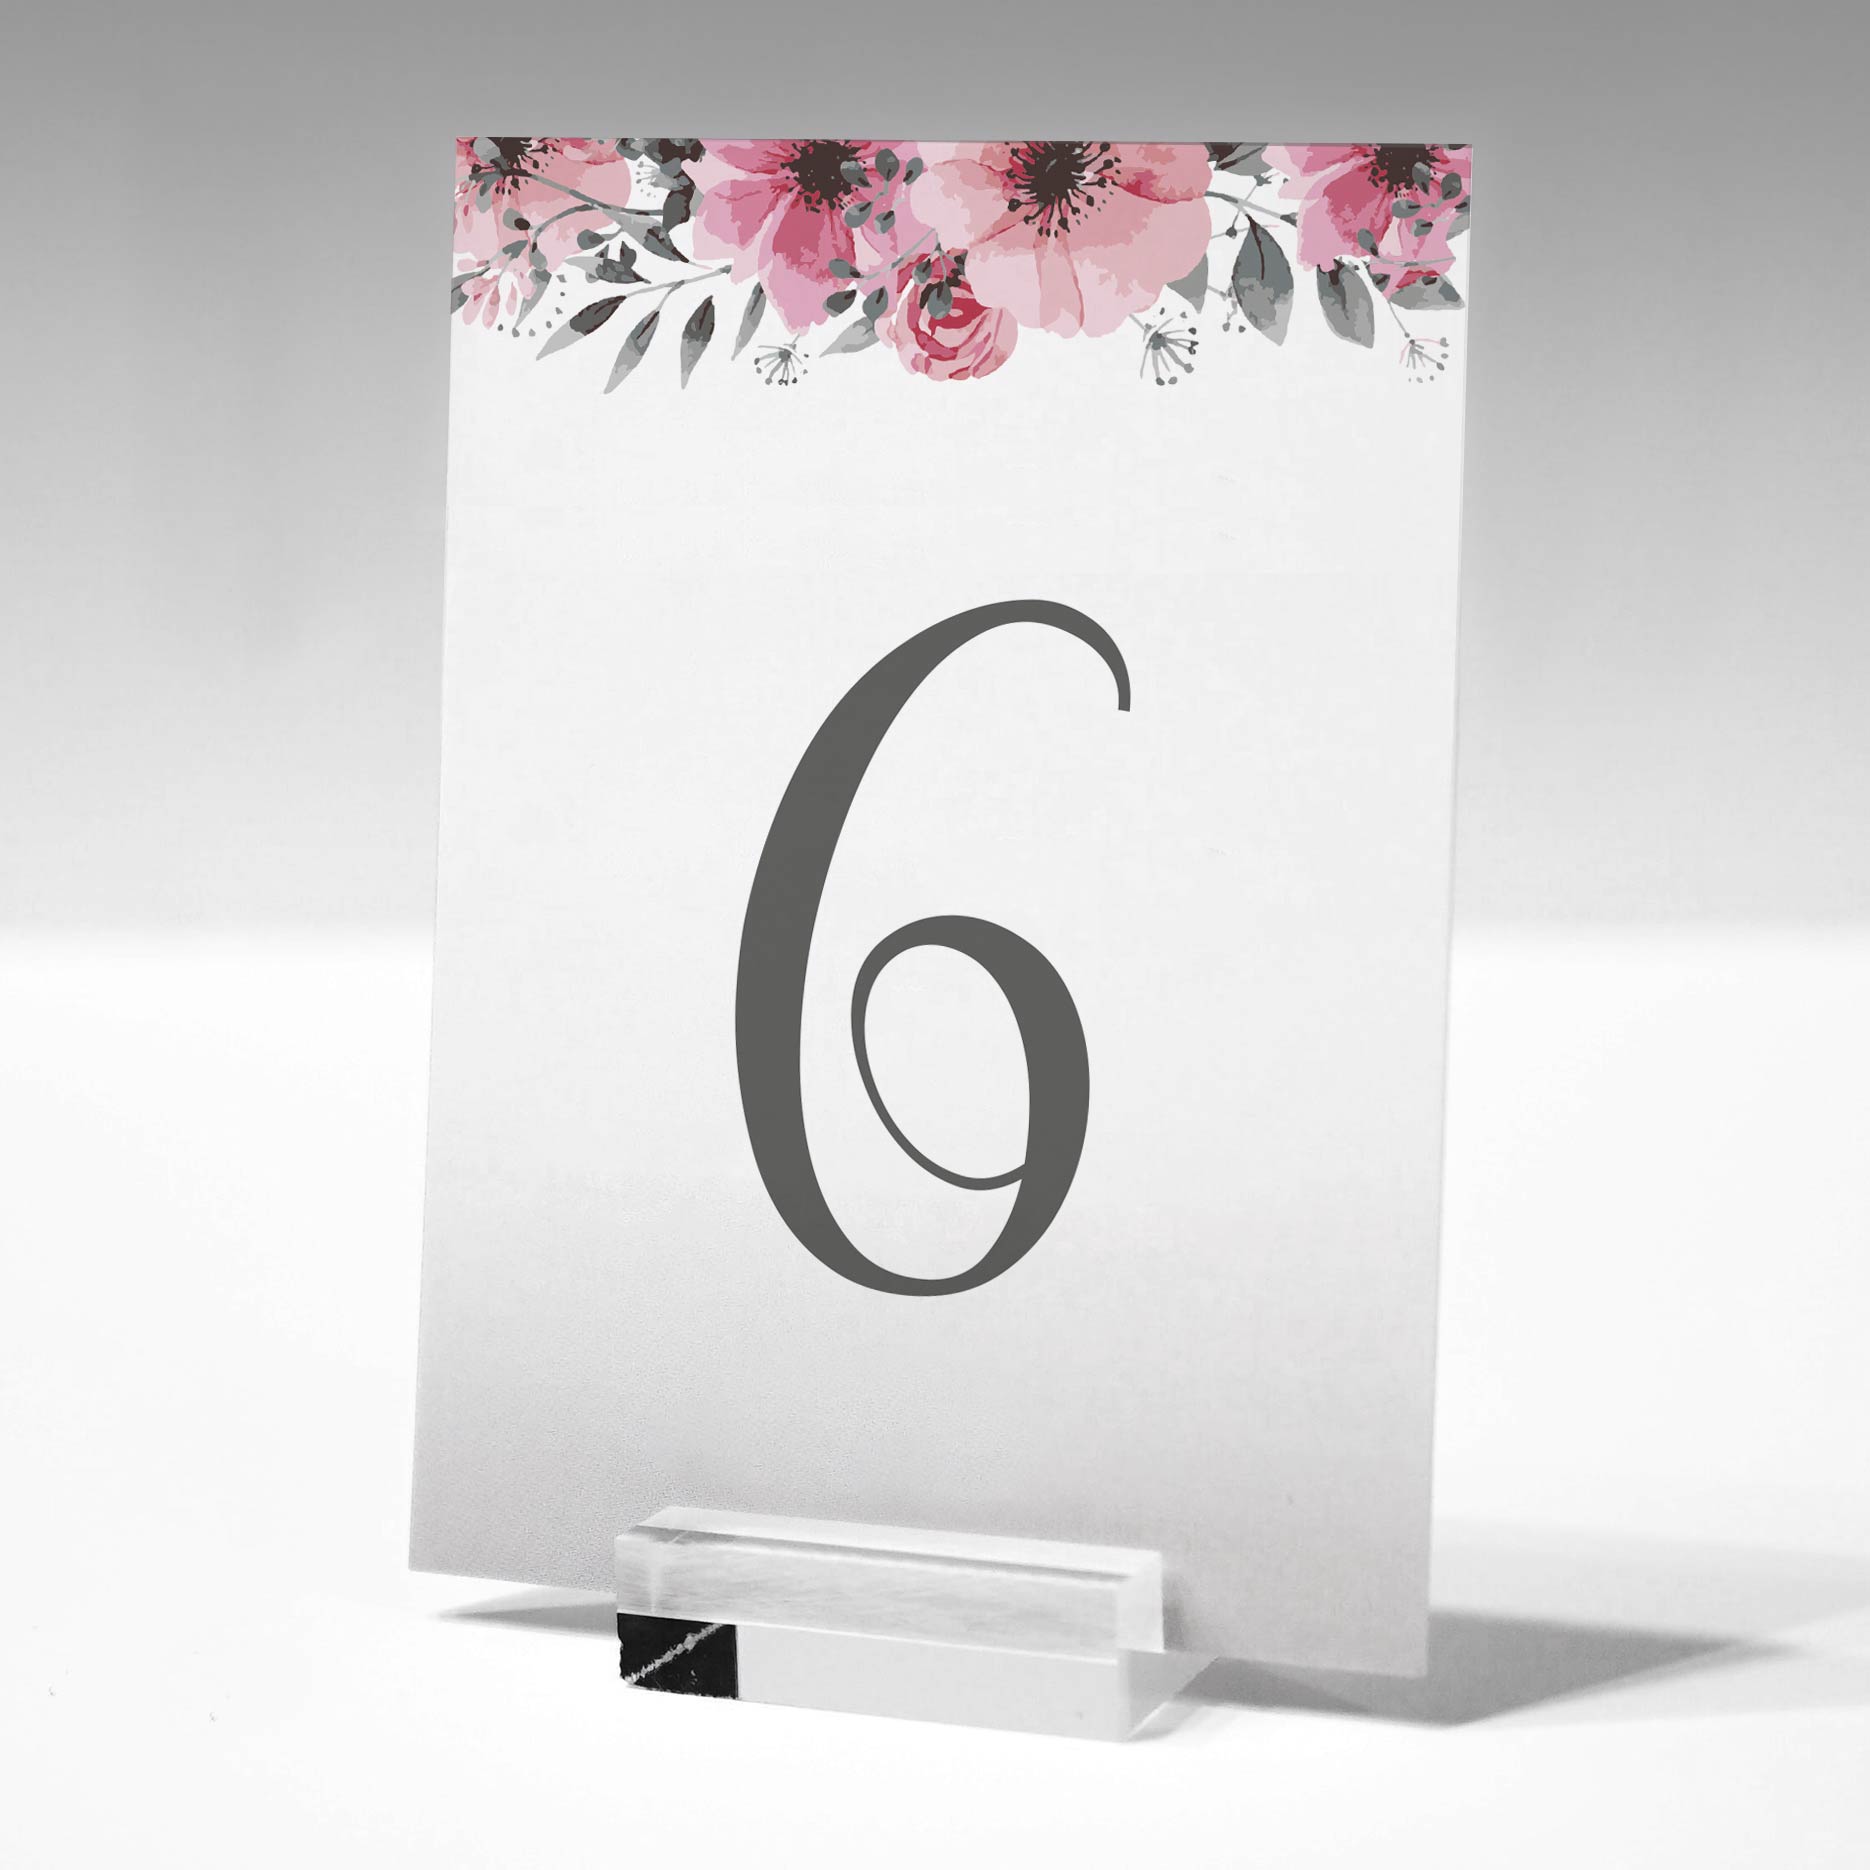 Table number 6 printed on card in a glass stand